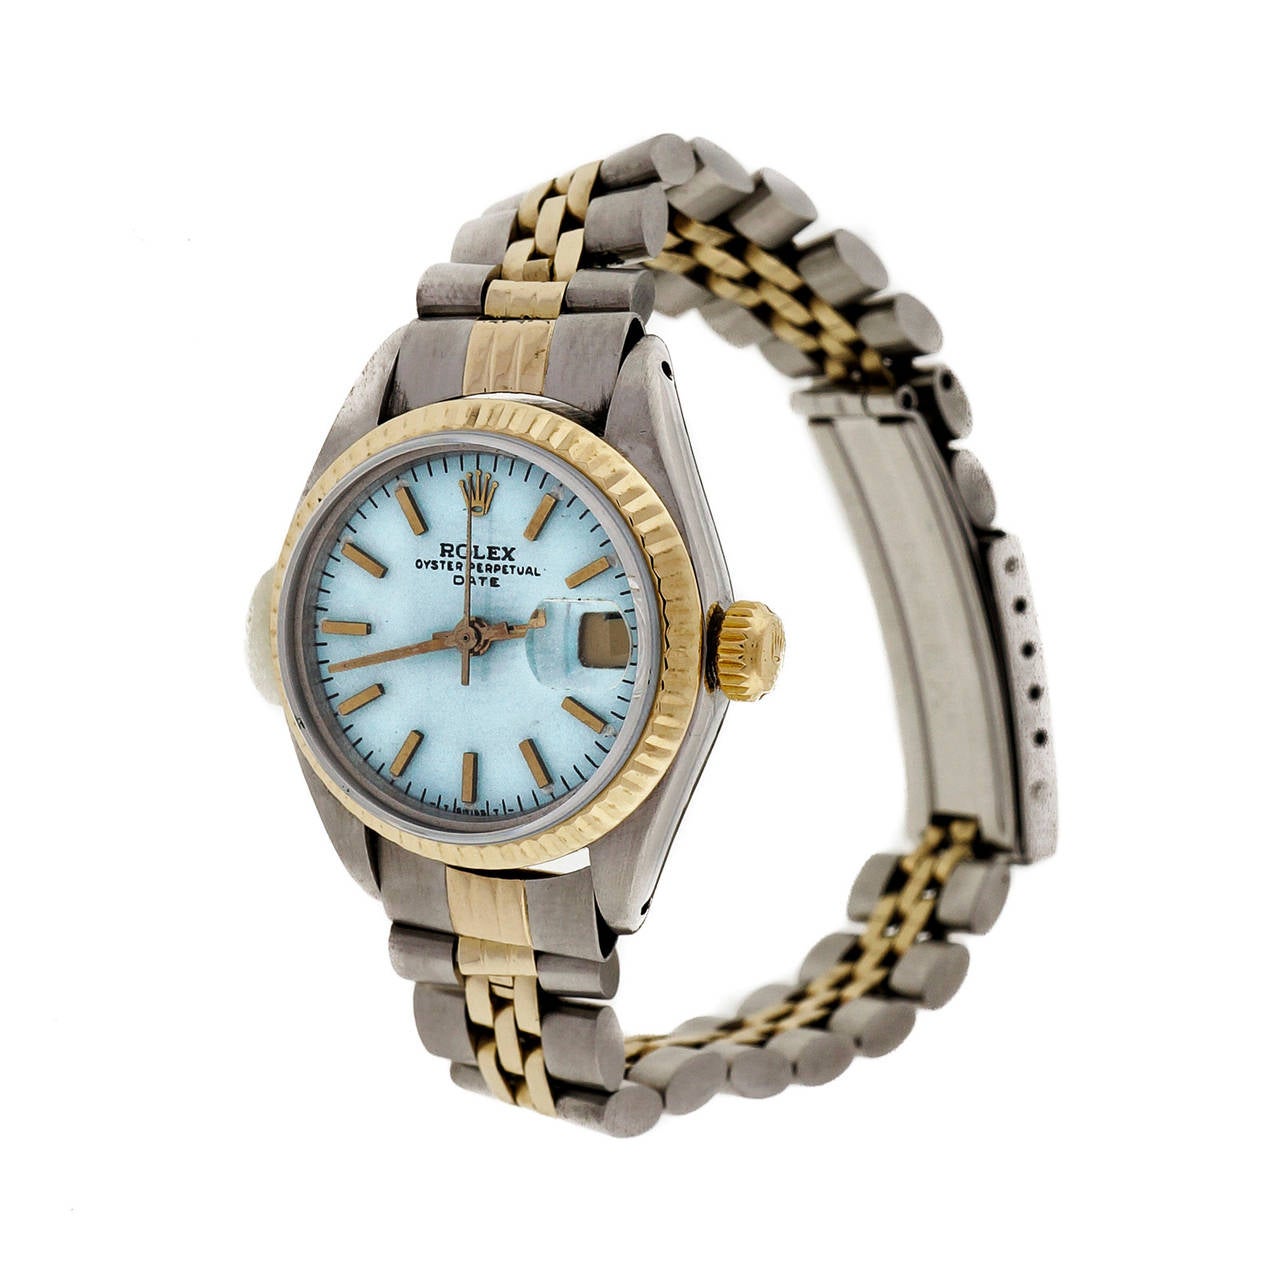 Very nice ladies Oyster Perpetual Date 14k yellow gold and steel Rolex watch with Original Rolex dial that has been refinished and custom colored by Peter Suchy with a bright  Turquoise blue dial and Sapphire crystal. Wonderful example of